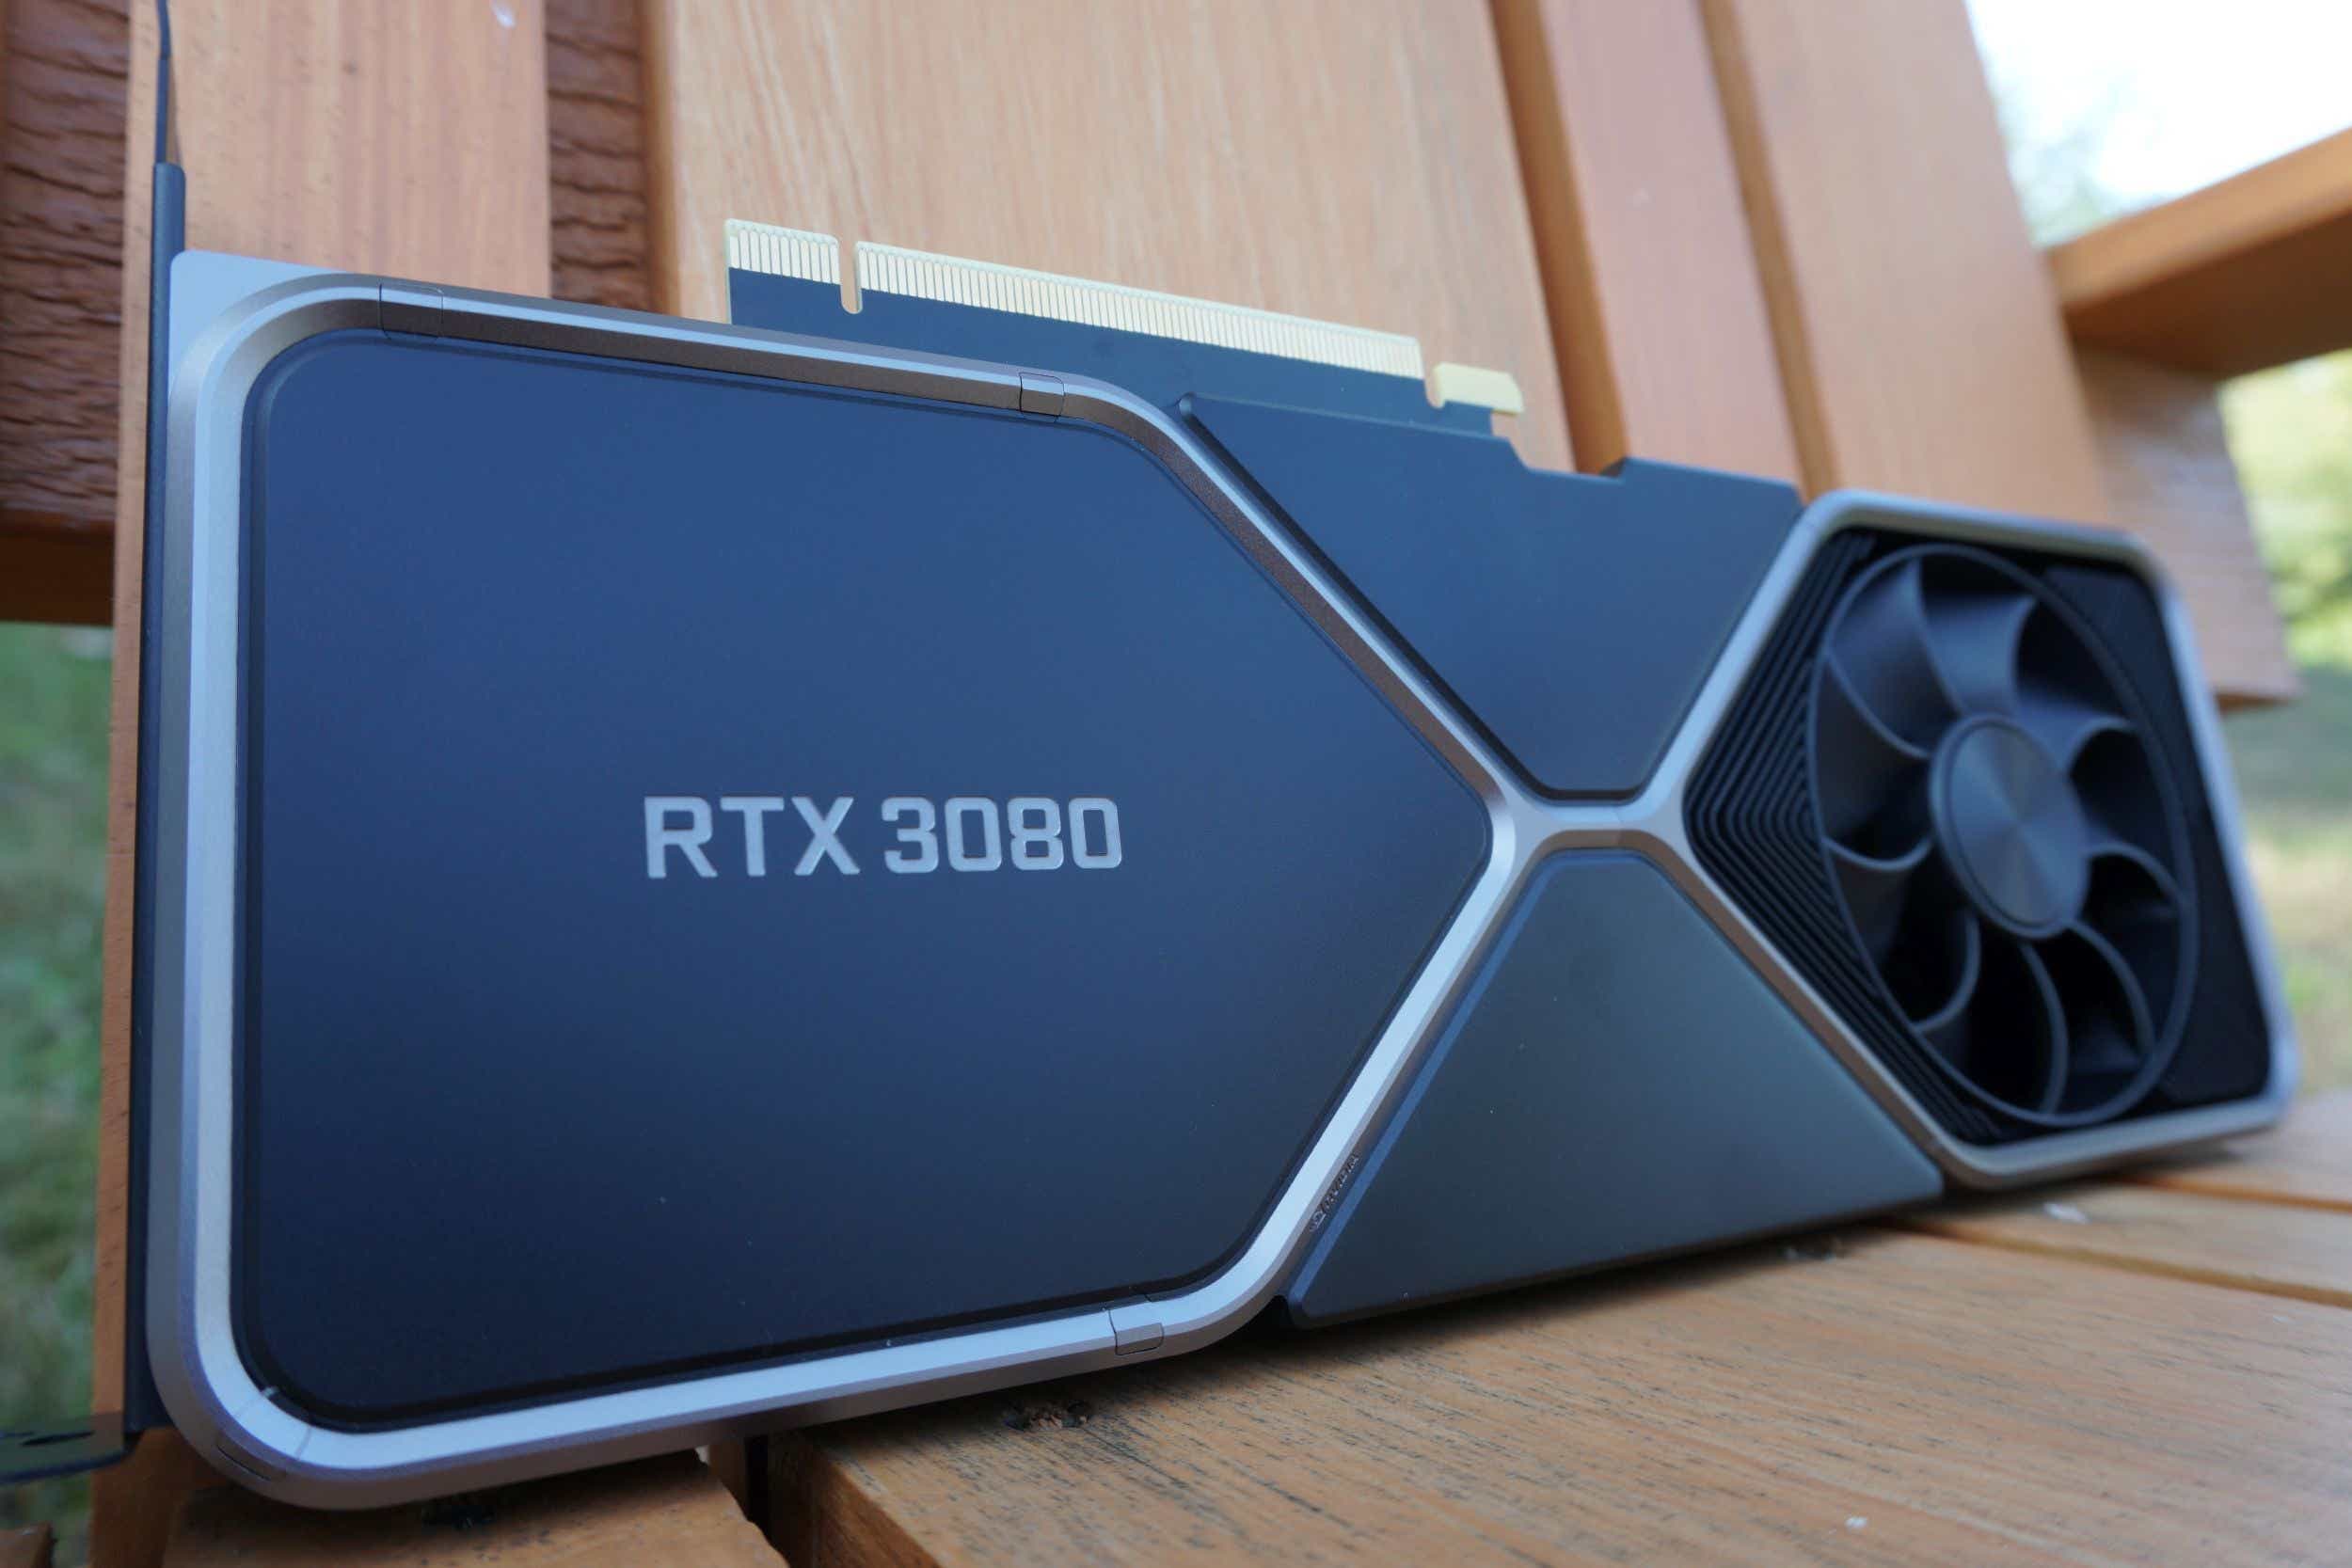 Nvidia GeForce RTX 3080 Founders Edition - Best 4K graphics card